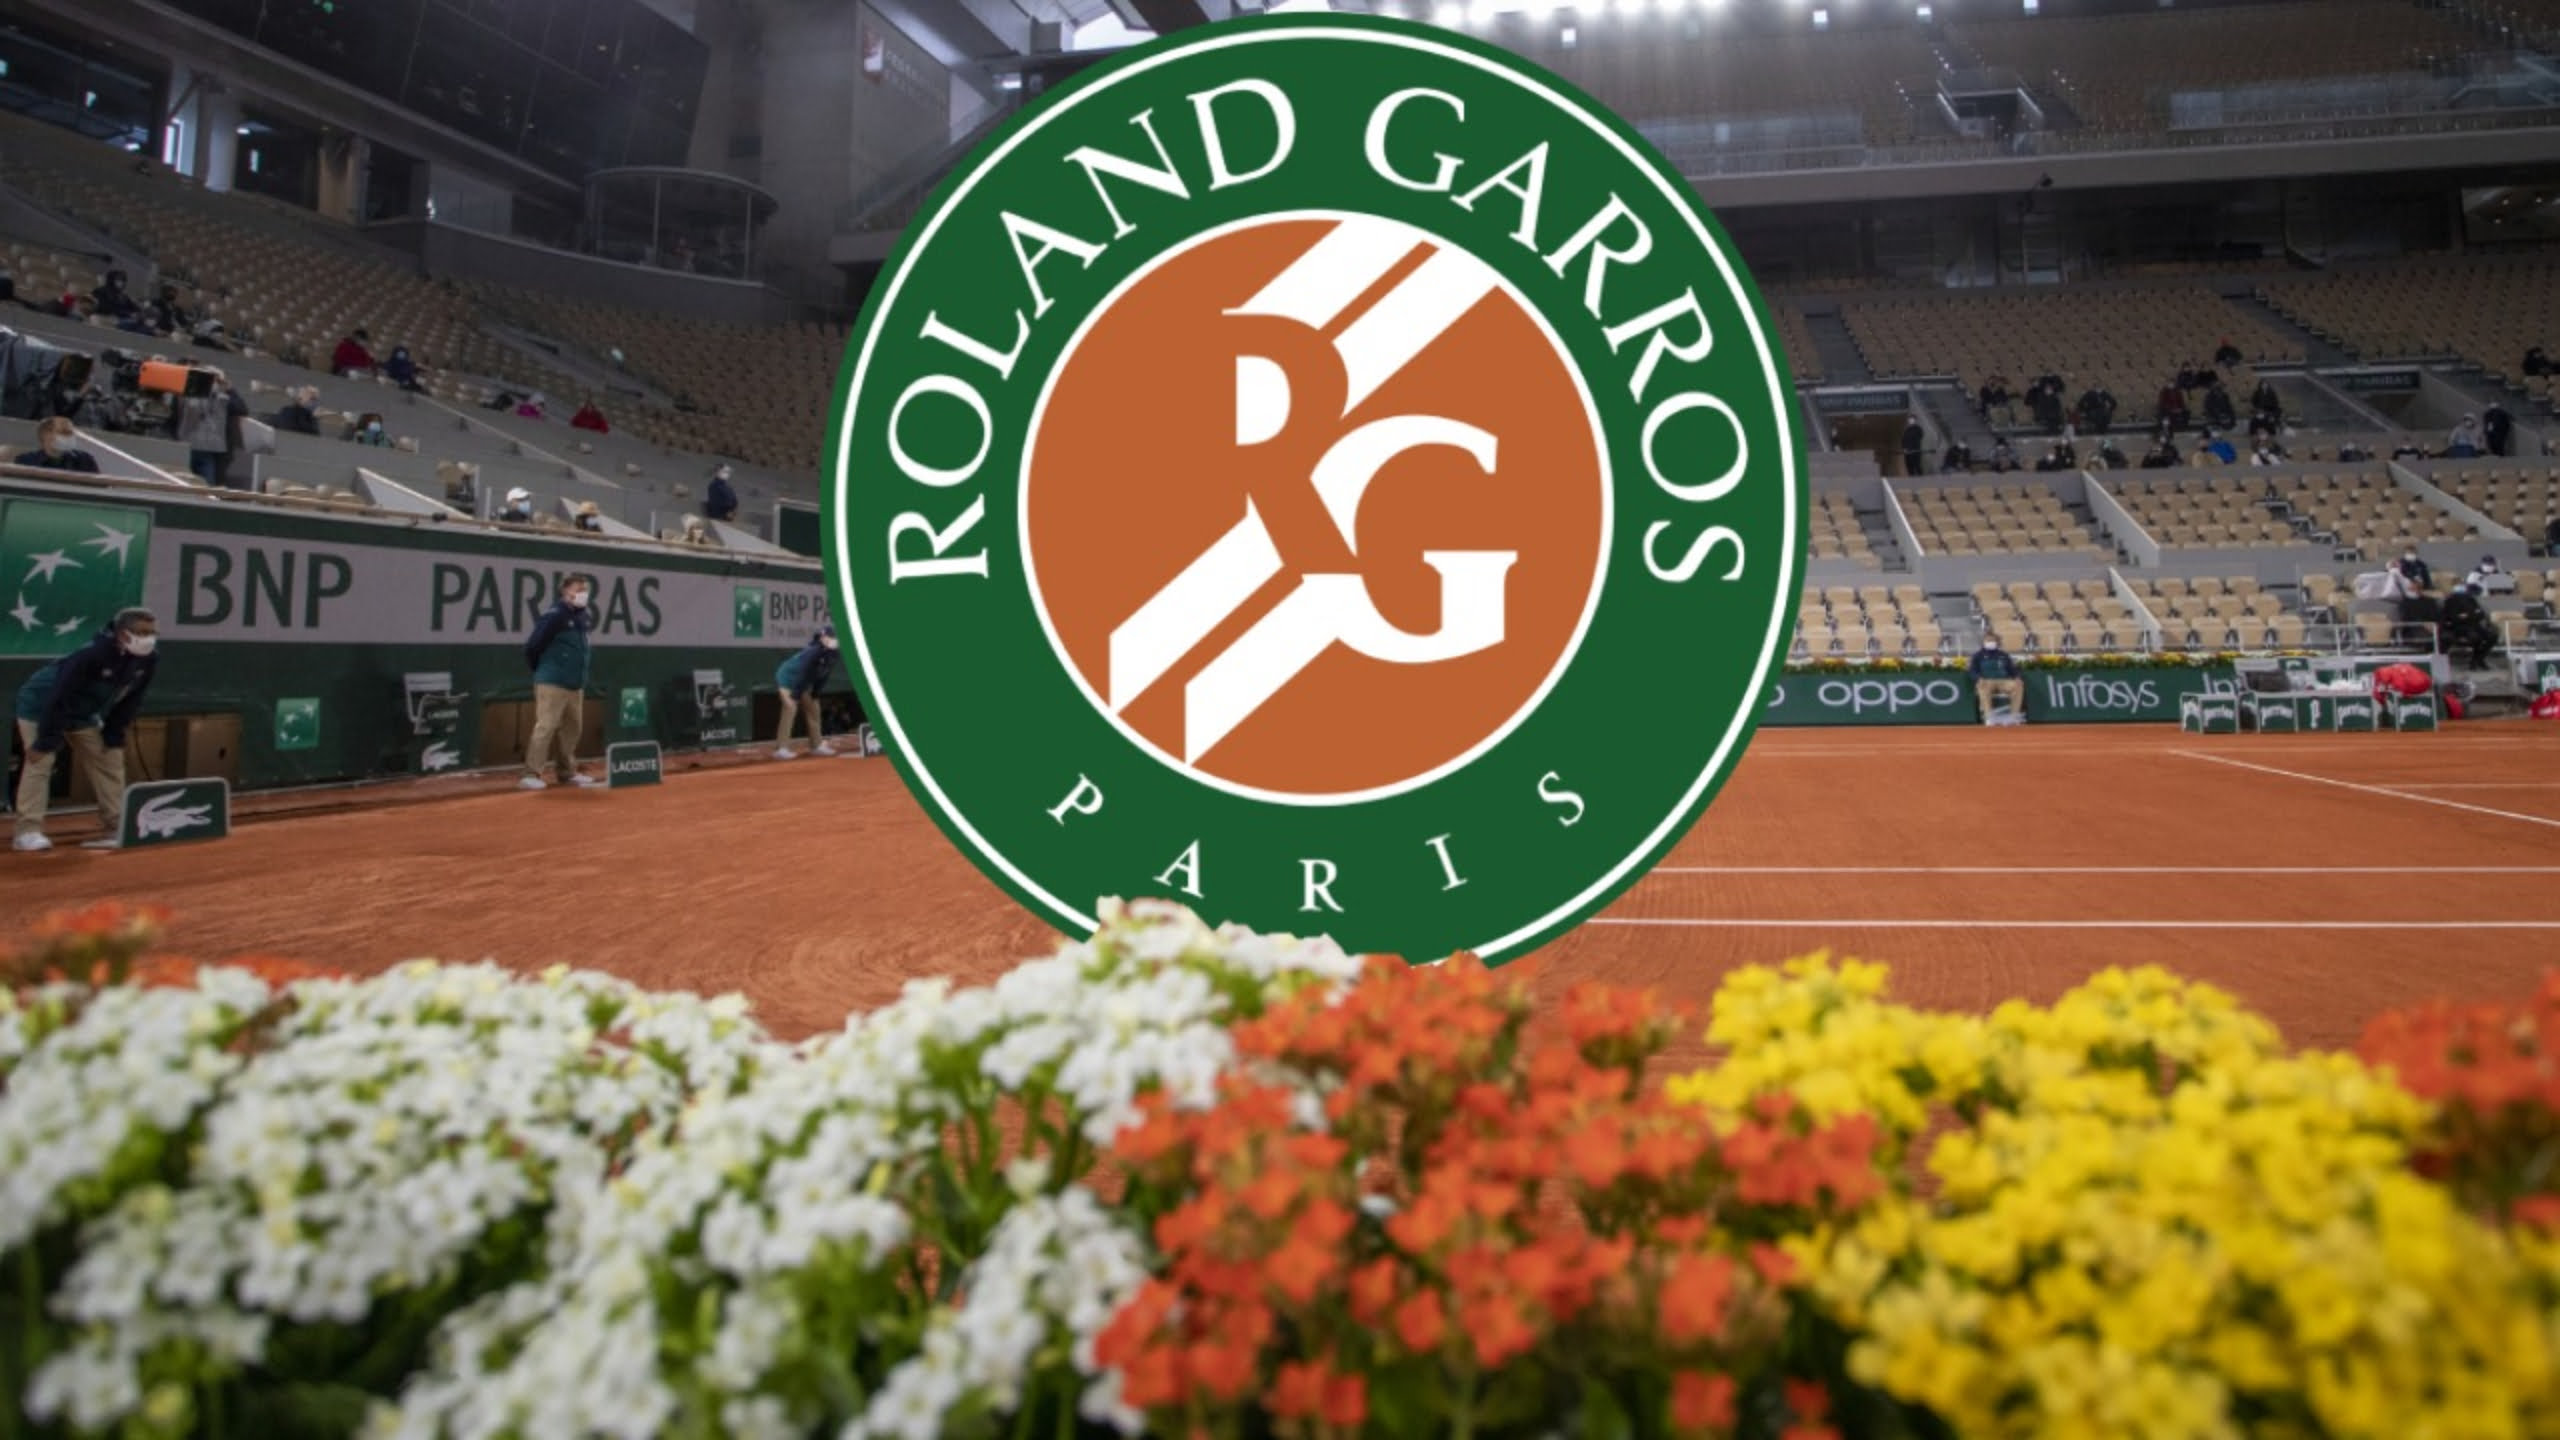 French Open 2023 Where, When, and How to Watch